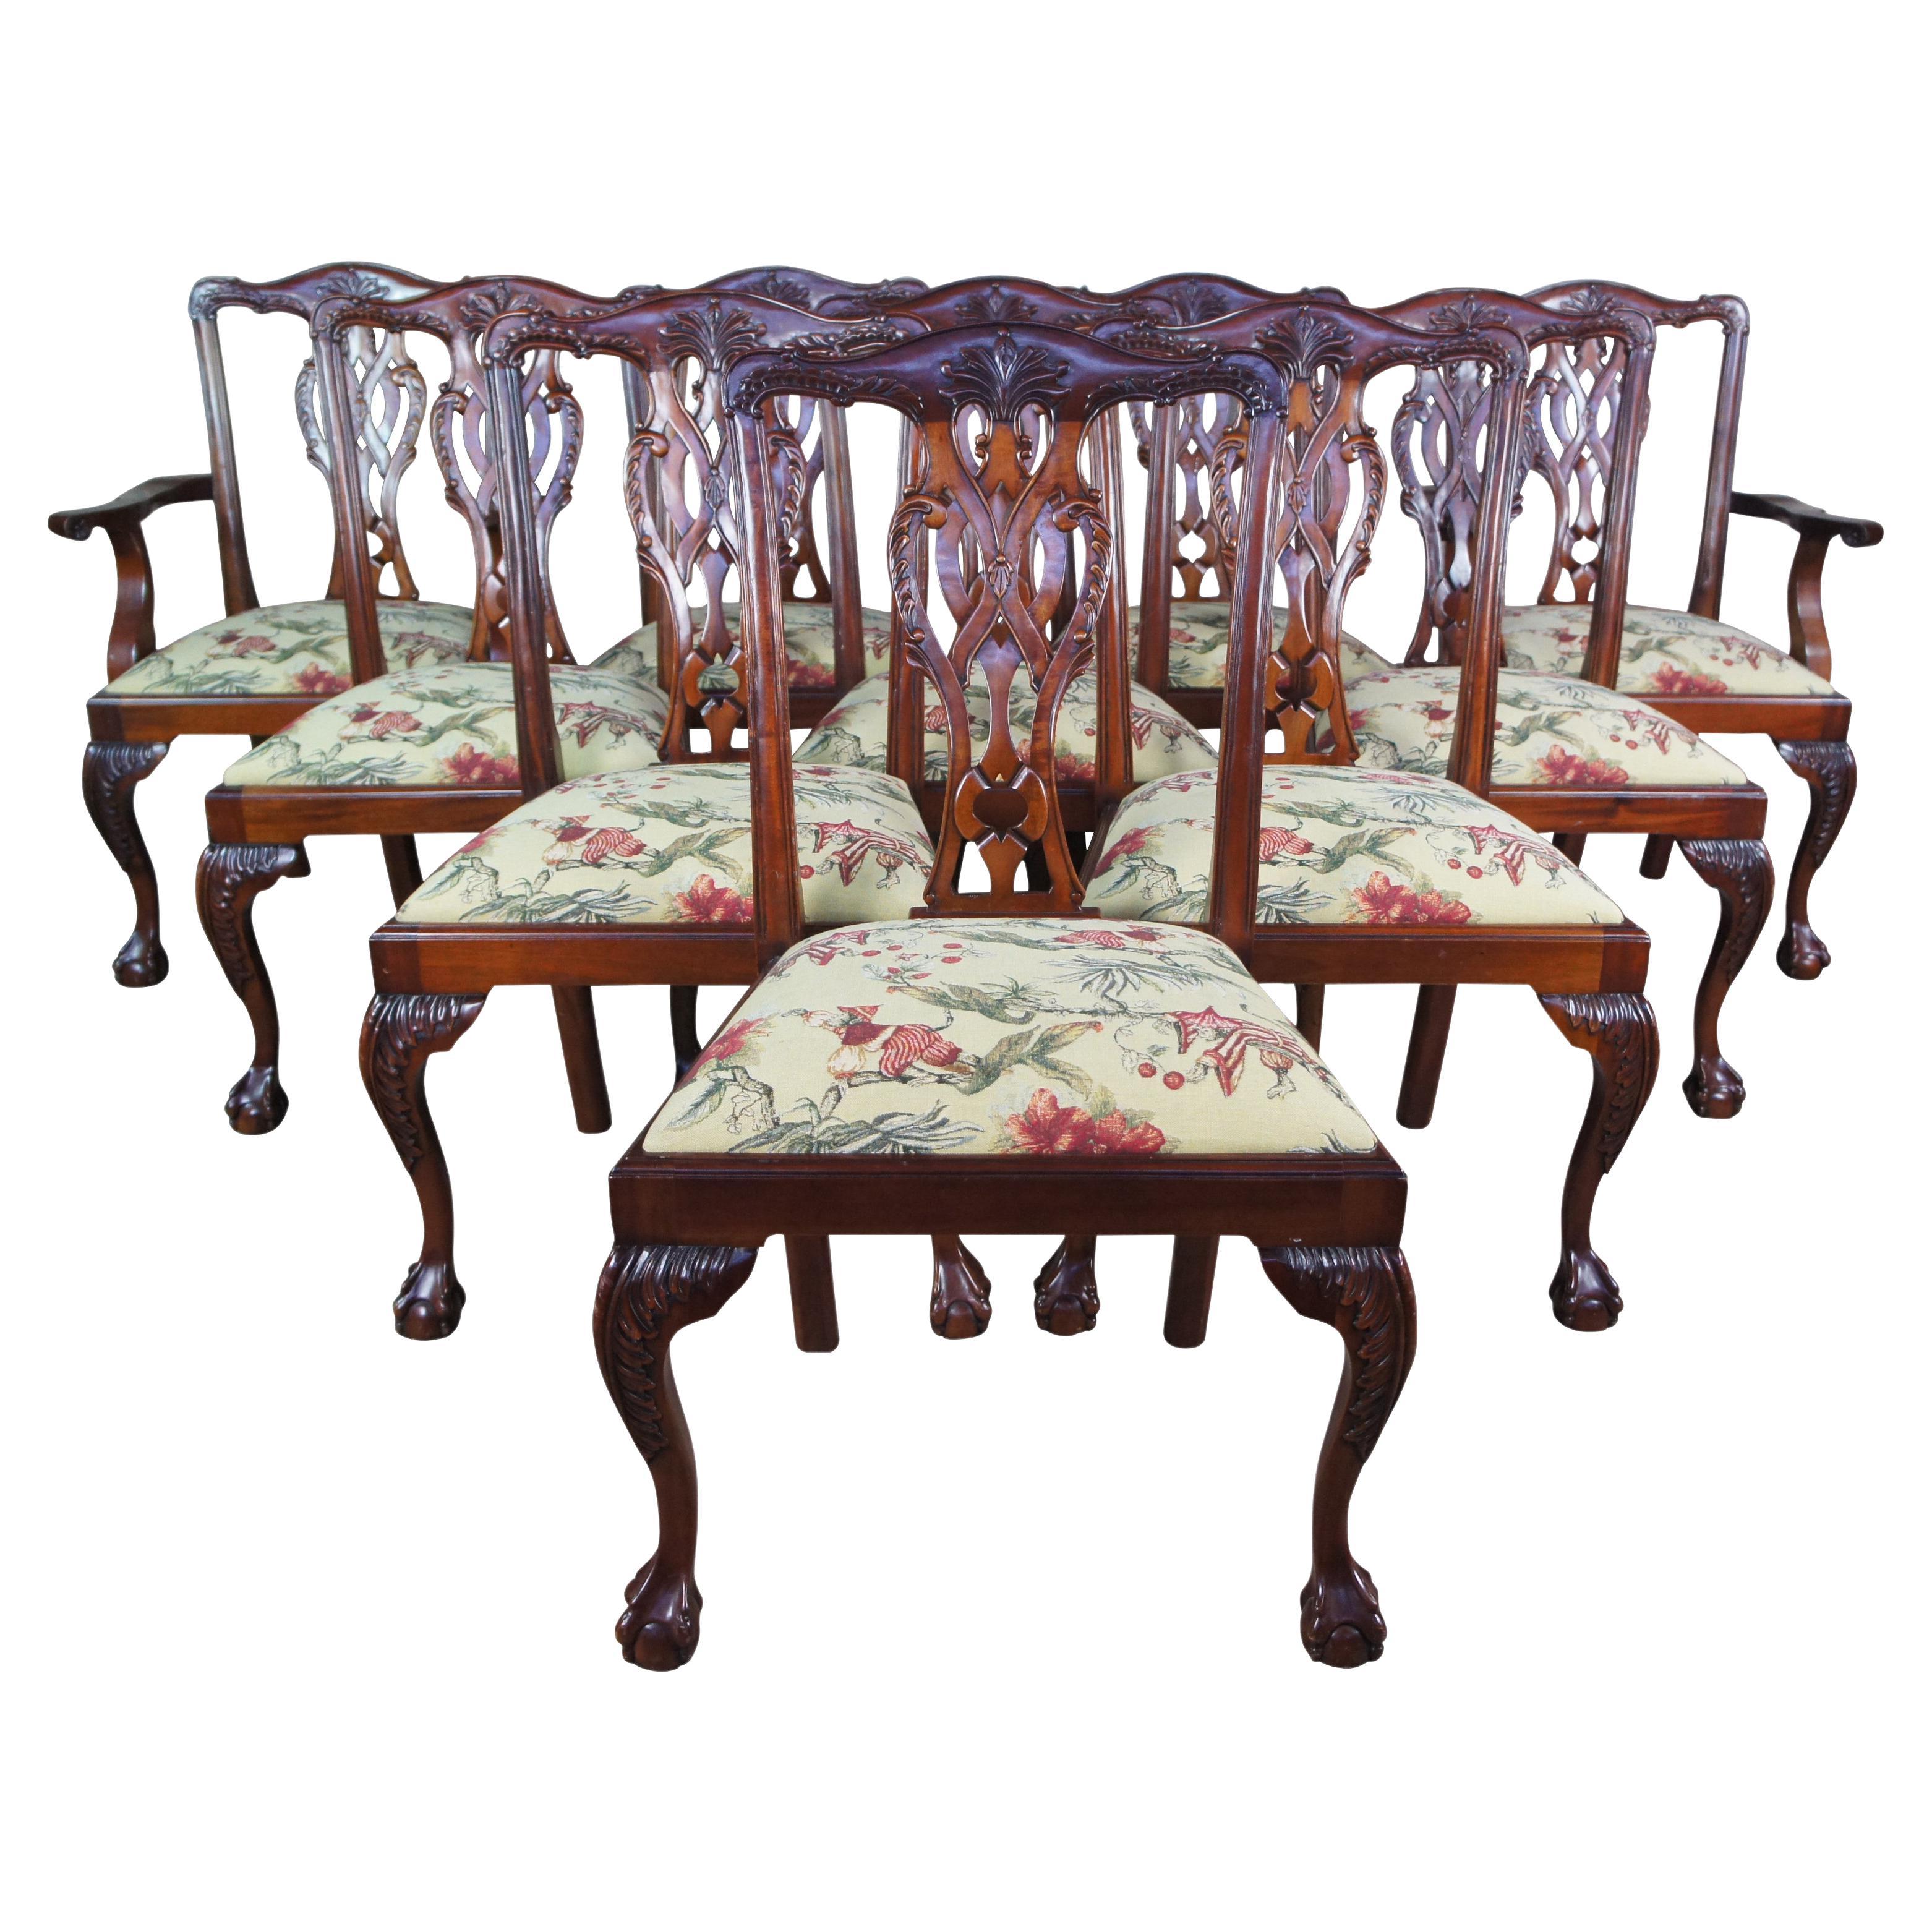 10 Vintage Chippendale Carved Mahogany Pretzel Back Ball & Claw Dining Chairs 